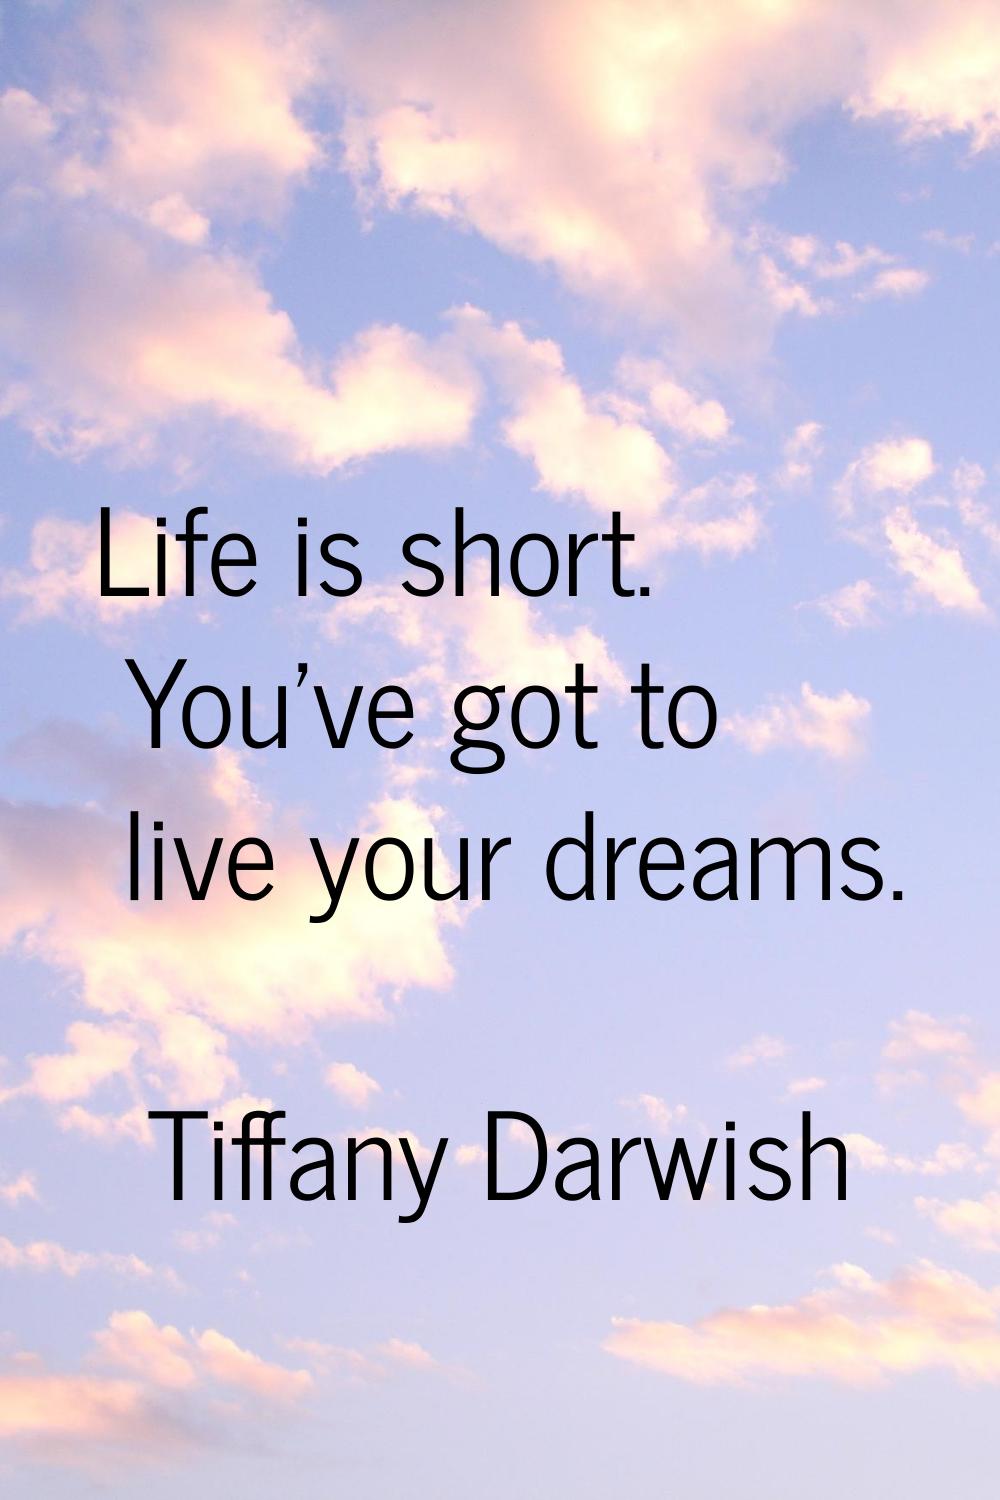 Life is short. You've got to live your dreams.